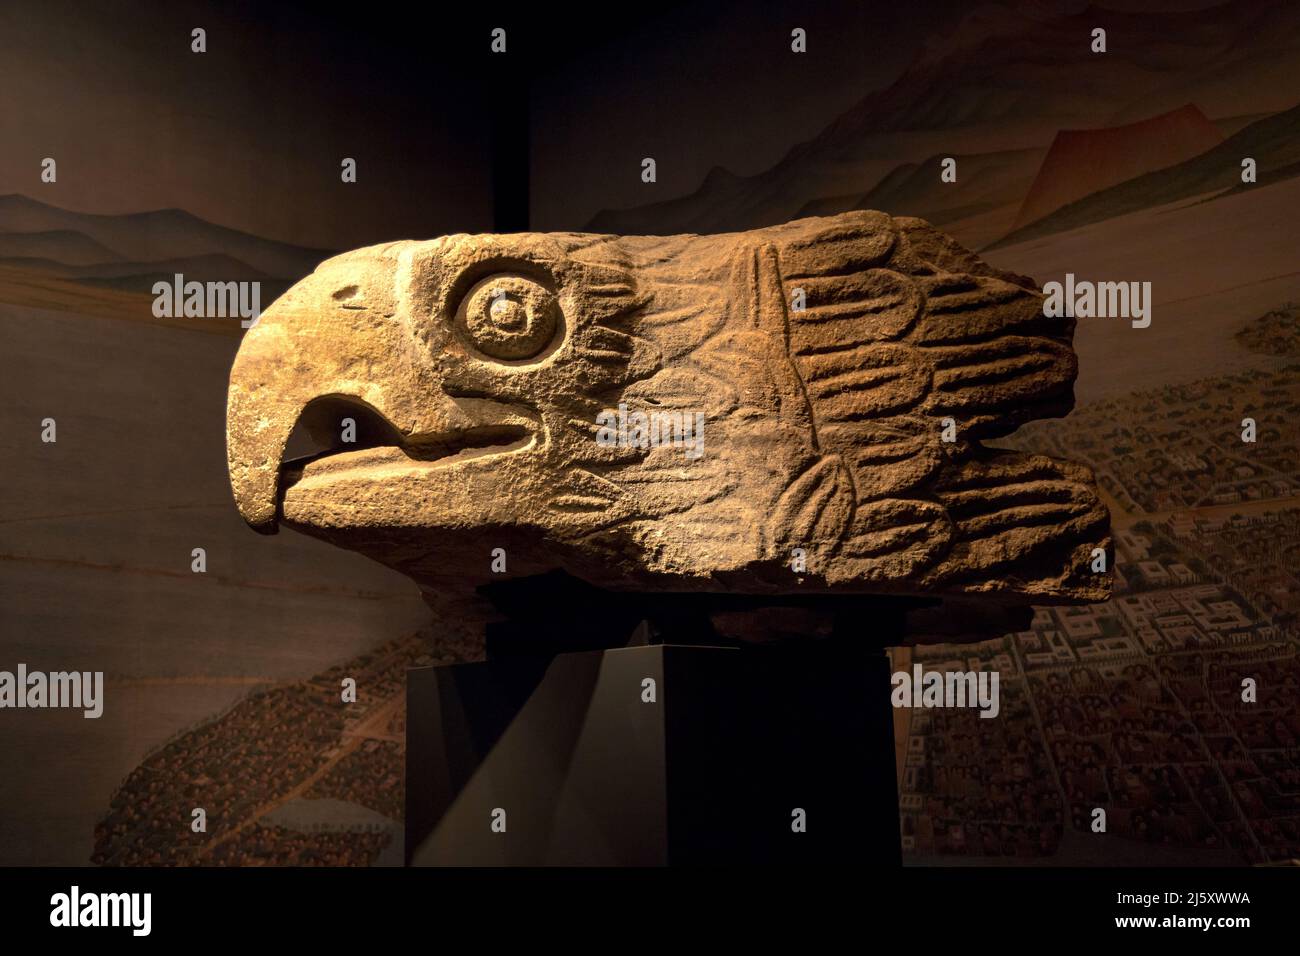 Leiden, The Netherlands - SEP 01, 2021: eagle bowl used for presenting offerings to the aztec gods from the ancient aztecs. From the area of Tehuacn, Stock Photo